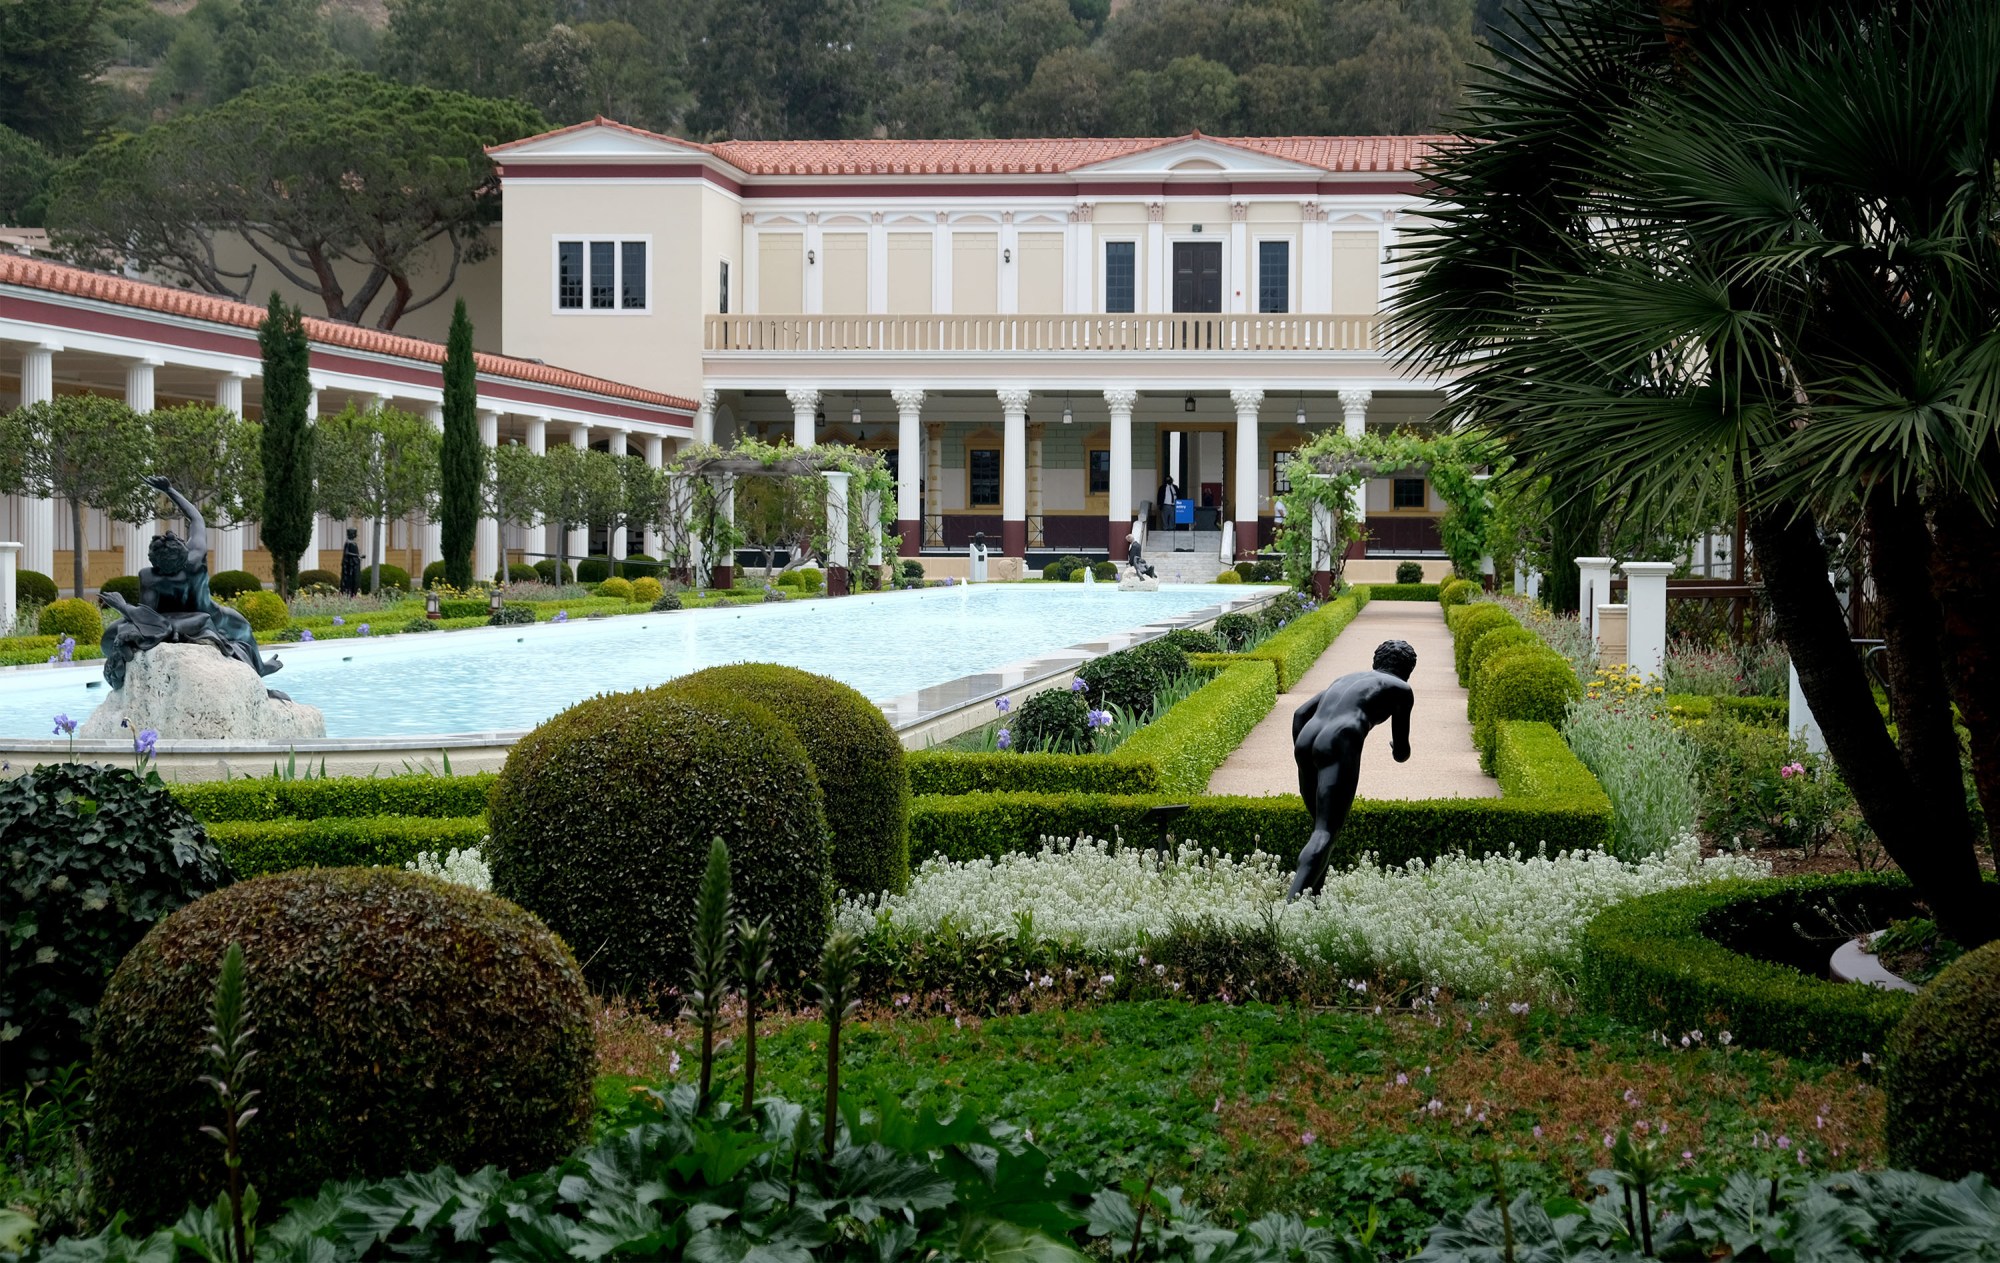 The Getty Villa Museum in Pacific Palisades reopened on Wednesday, April 21, 2021. (Photo by Dean Musgrove, Los Angeles Daily News/SCNG)